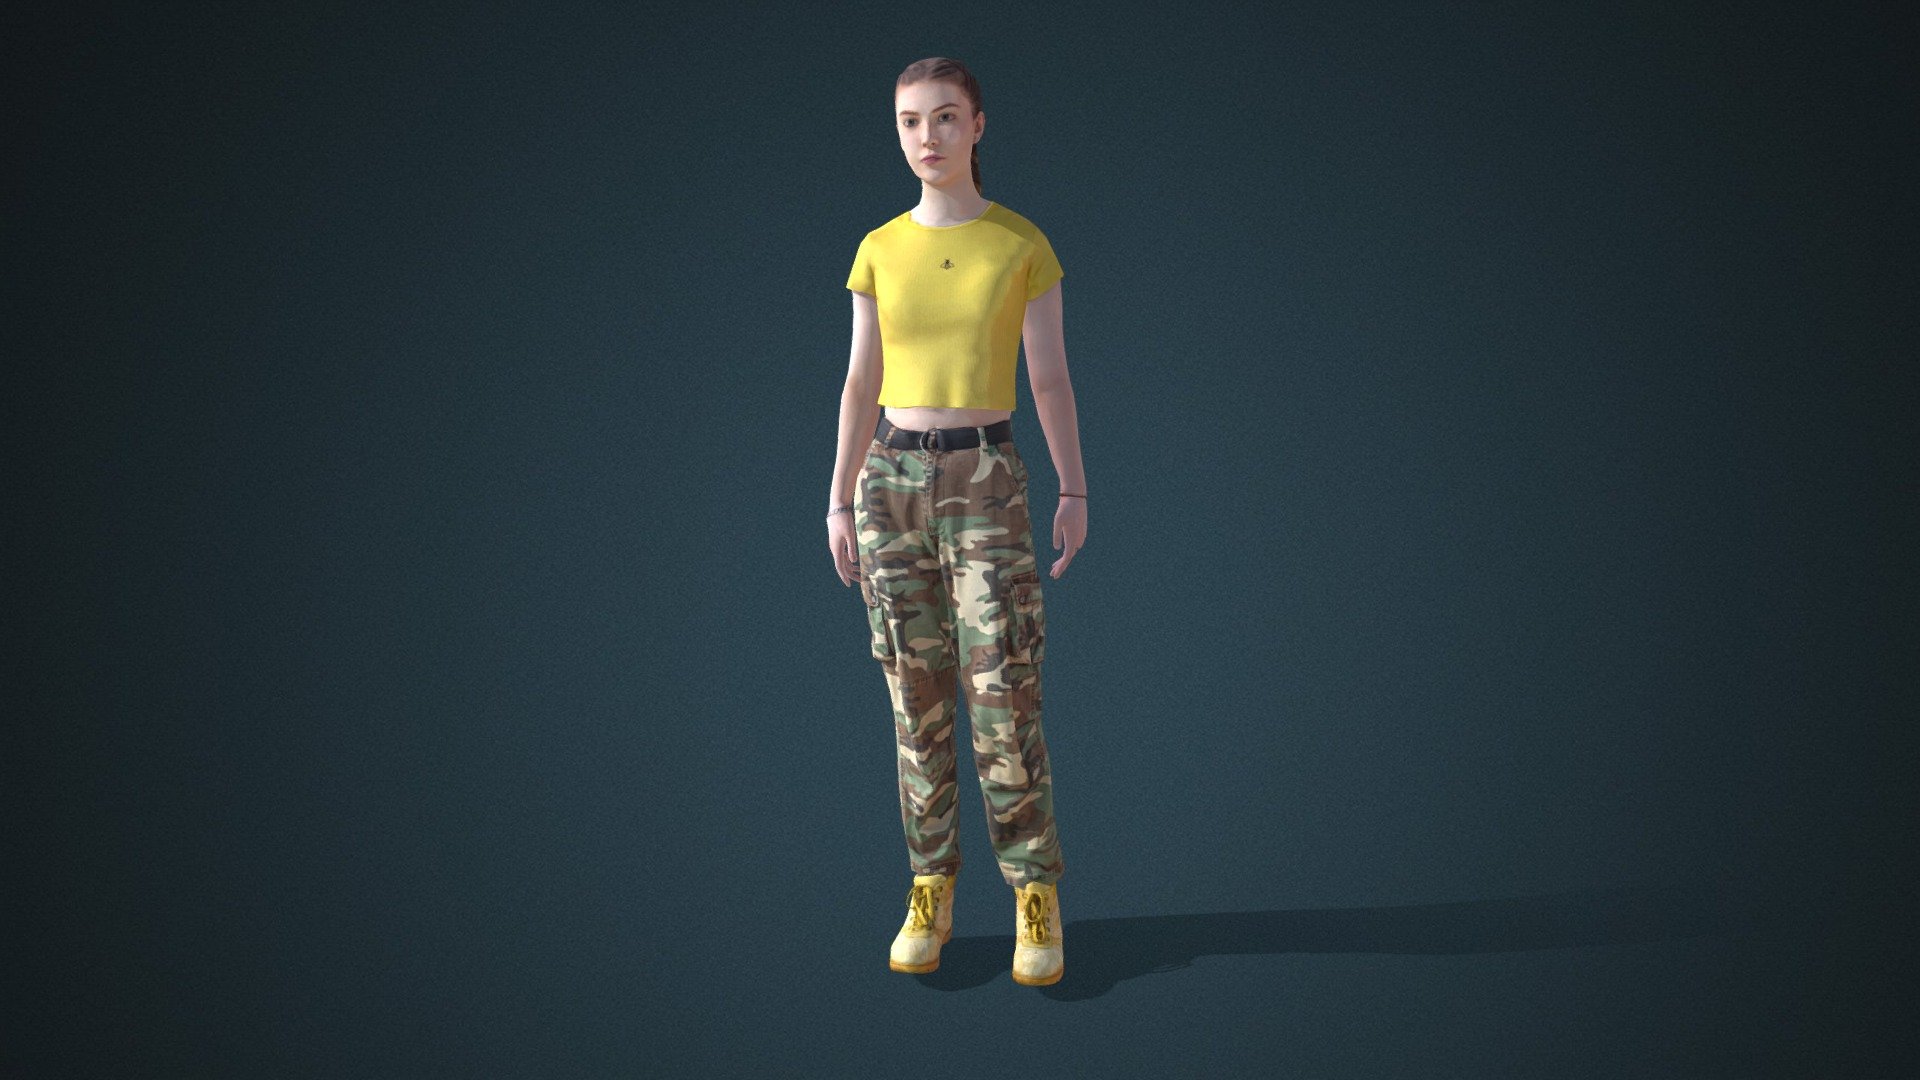 Do you like this model?  Free Download more models, motions and auto rigging tool AccuRIG (Value: $150+) on ActorCore
 

This model includes 2 mocap animations:  Modern_F_Idle,Modern_F_Walk. Get more free motions

Design for high-performance crowd animation.

Buy full pack and Save 20%+: Young Fashion Vol.4


SPECIFICATIONS

✔ Geometry : 7K~10K Quads, one mesh

✔ Material : One material with changeable colors.

✔ Texture Resolution : 4K

✔ Shader : PBR, Diffuse, Normal, Roughness, Metallic, Opacity

✔ Rigged : Facial and Body (shoulders, fingers, toes, eyeballs, jaw)

✔ Blendshape : 122 for facial expressions and lipsync

✔ Compatible with iClone AccuLips, Facial ExPlus, and traditional lip-sync.


About Reallusion ActorCore

ActorCore offers the highest quality 3D asset libraries for mocap motions and animated 3D humans for crowd rendering 3d model